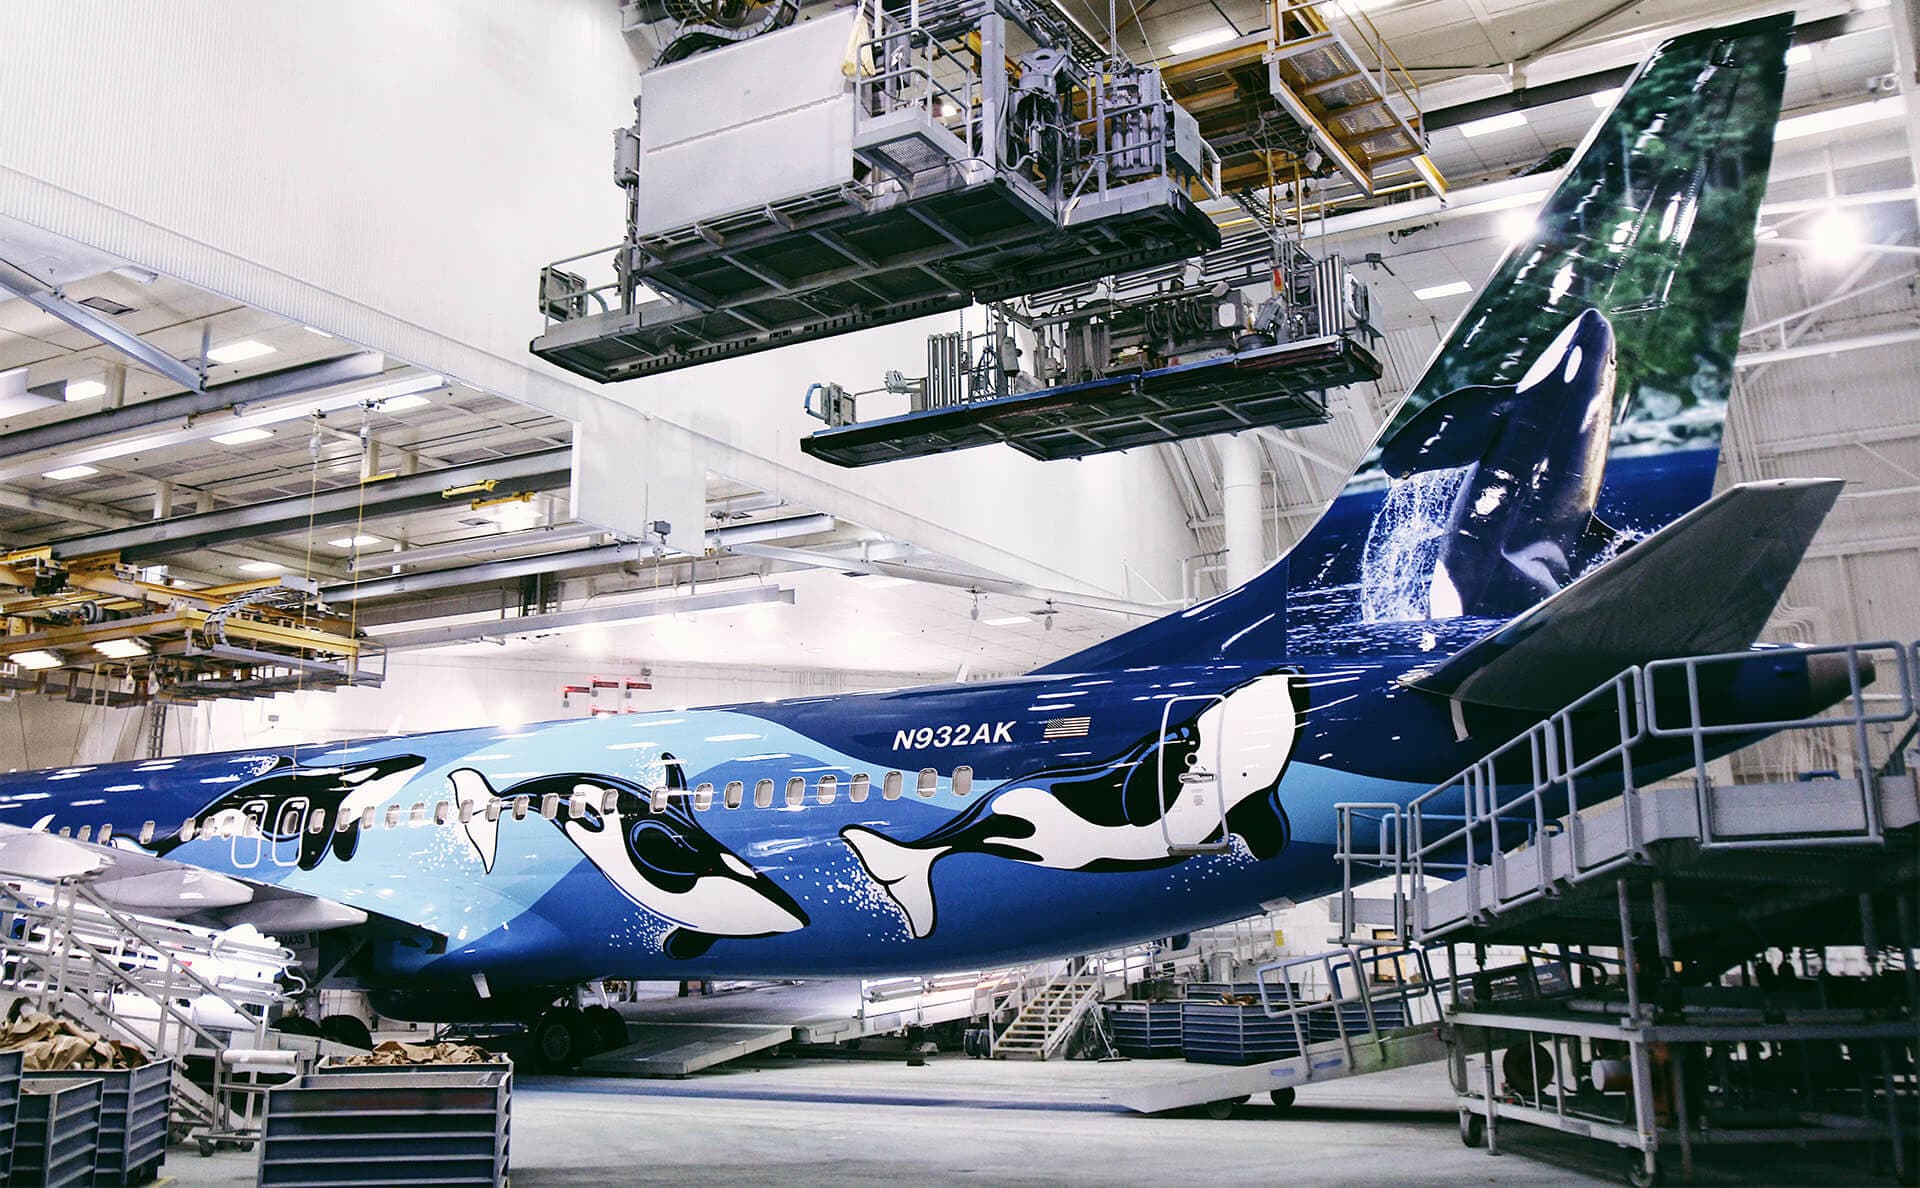 Alaska Airlines 737 airplane with orca livery design in paint hanger